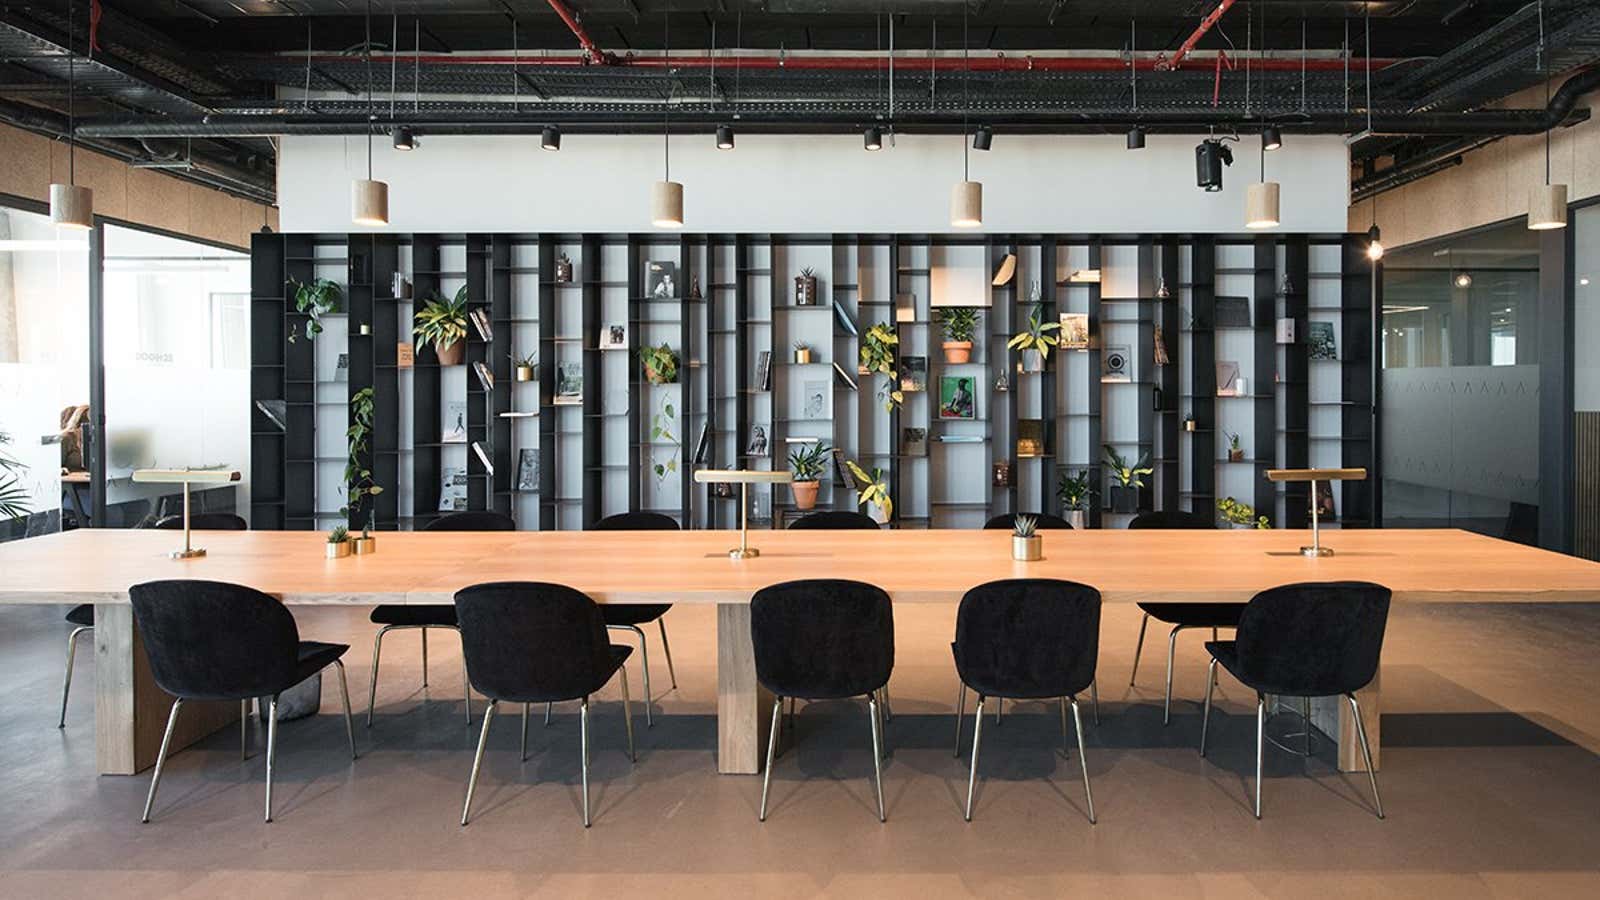 LABS TLV is one of many innovative co-working spaces driving Tel Aviv’s shared workplace trend.